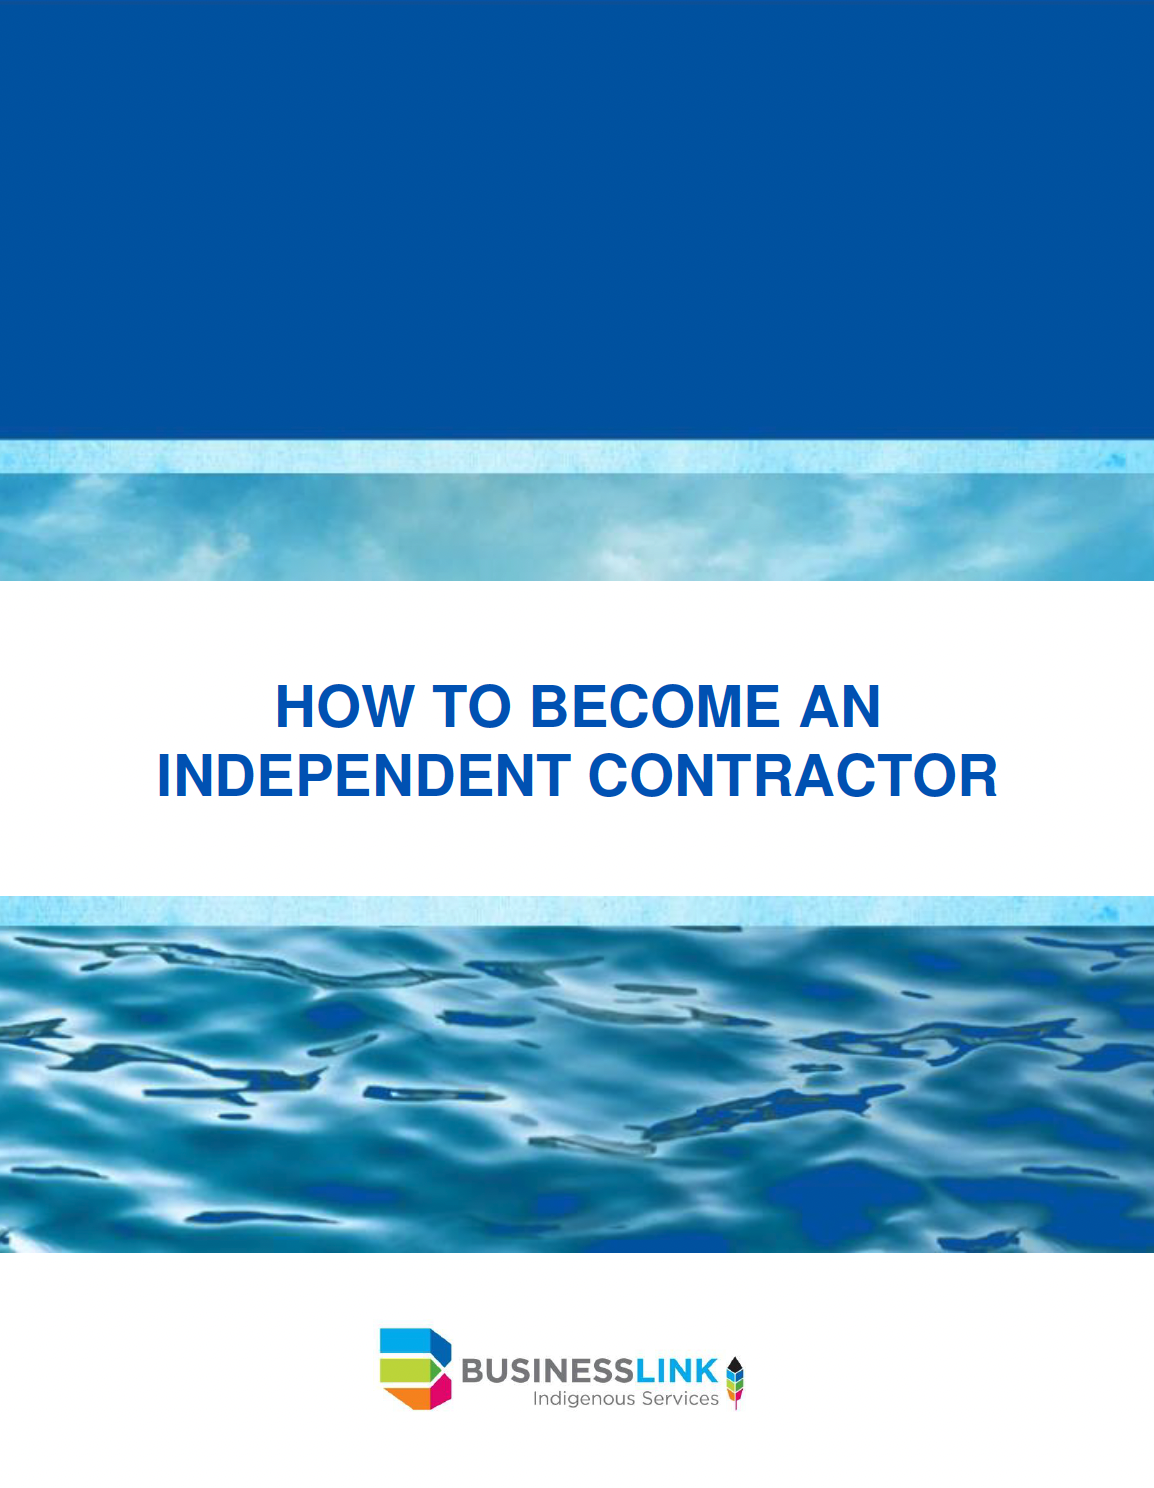 How to Become an Independant Contractor